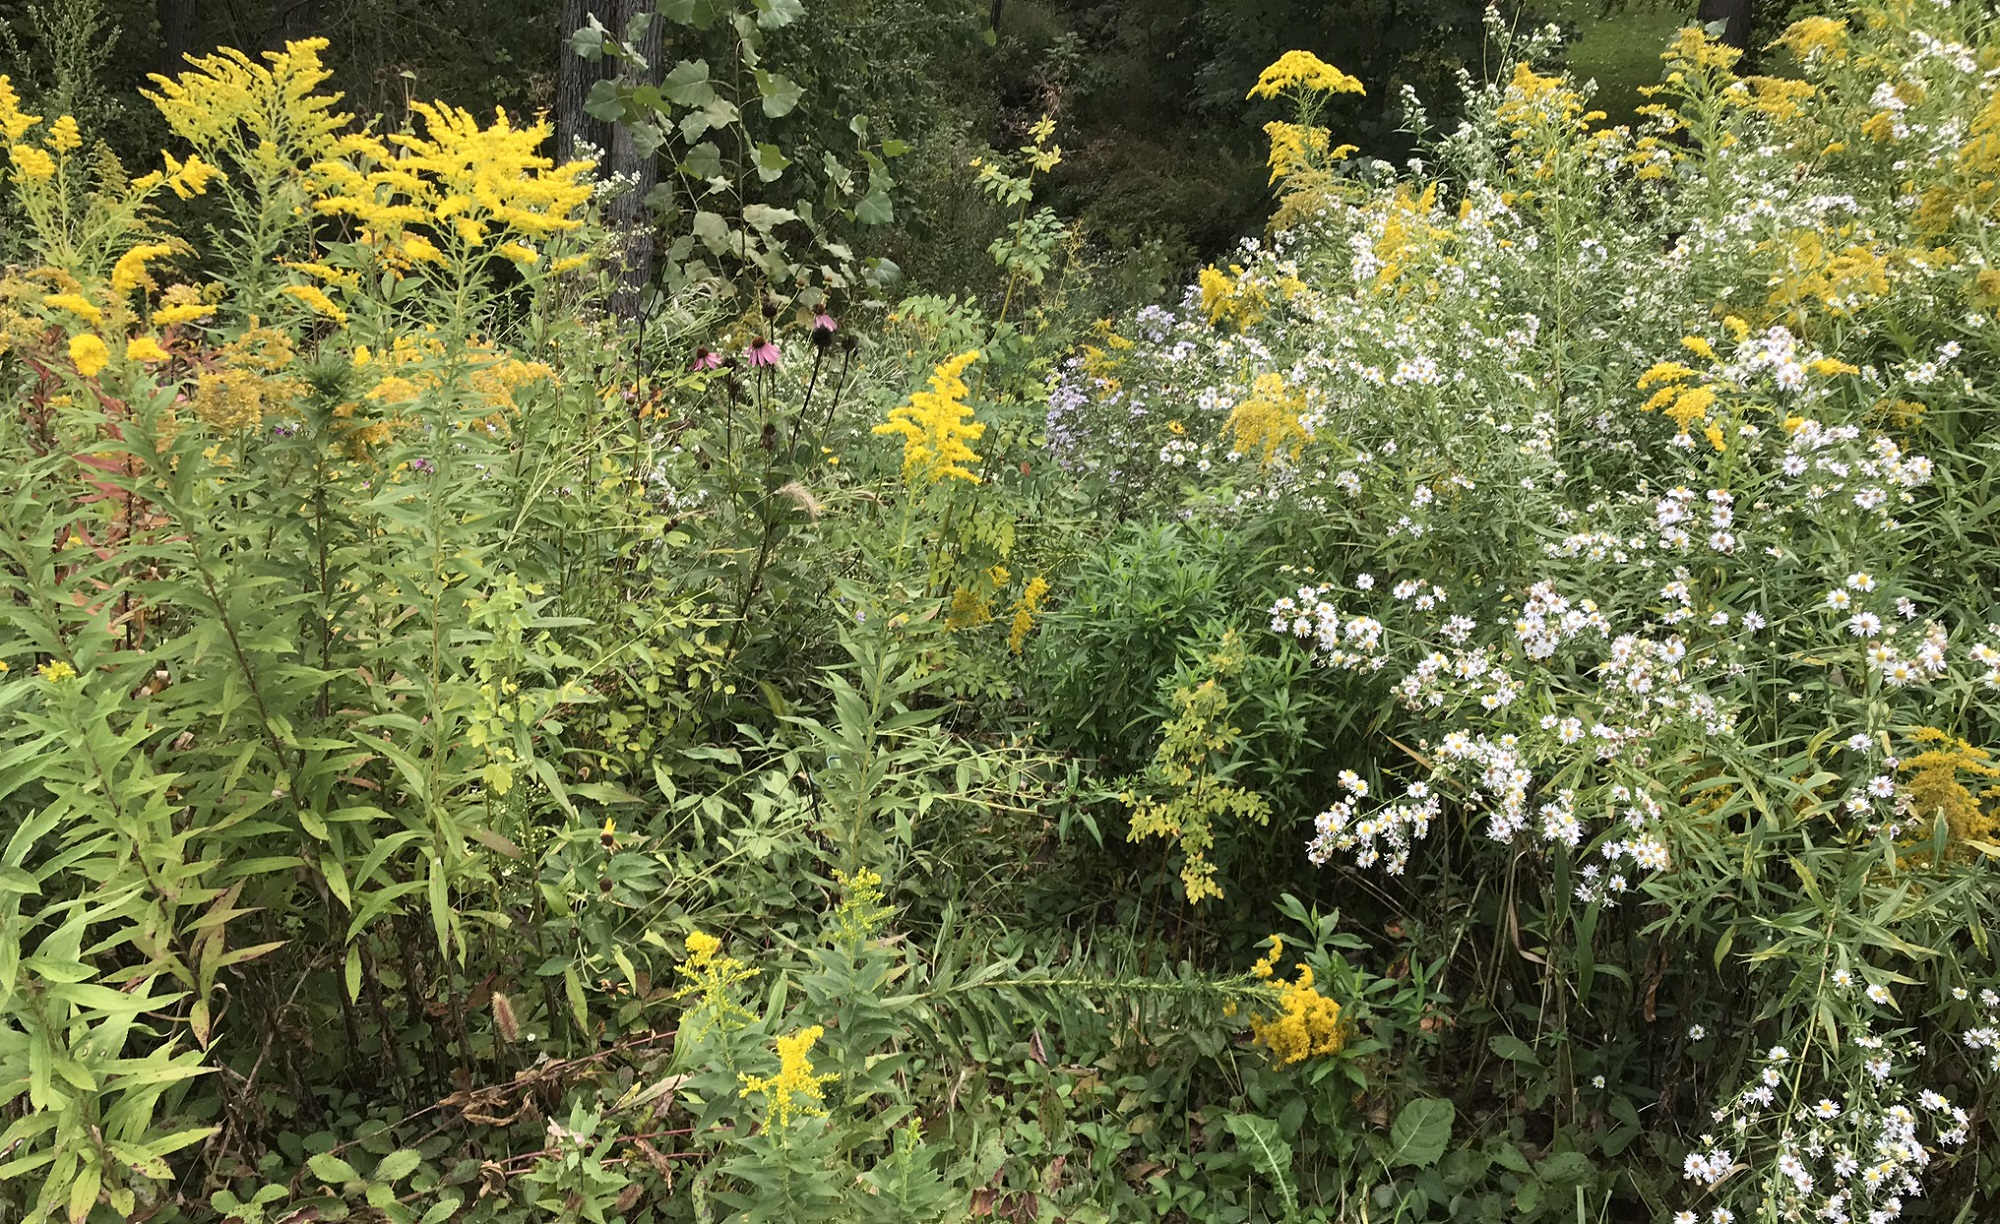 Goldenrods and asters make a nice scene of white and yellow in a Loch Lomond backyard in late September